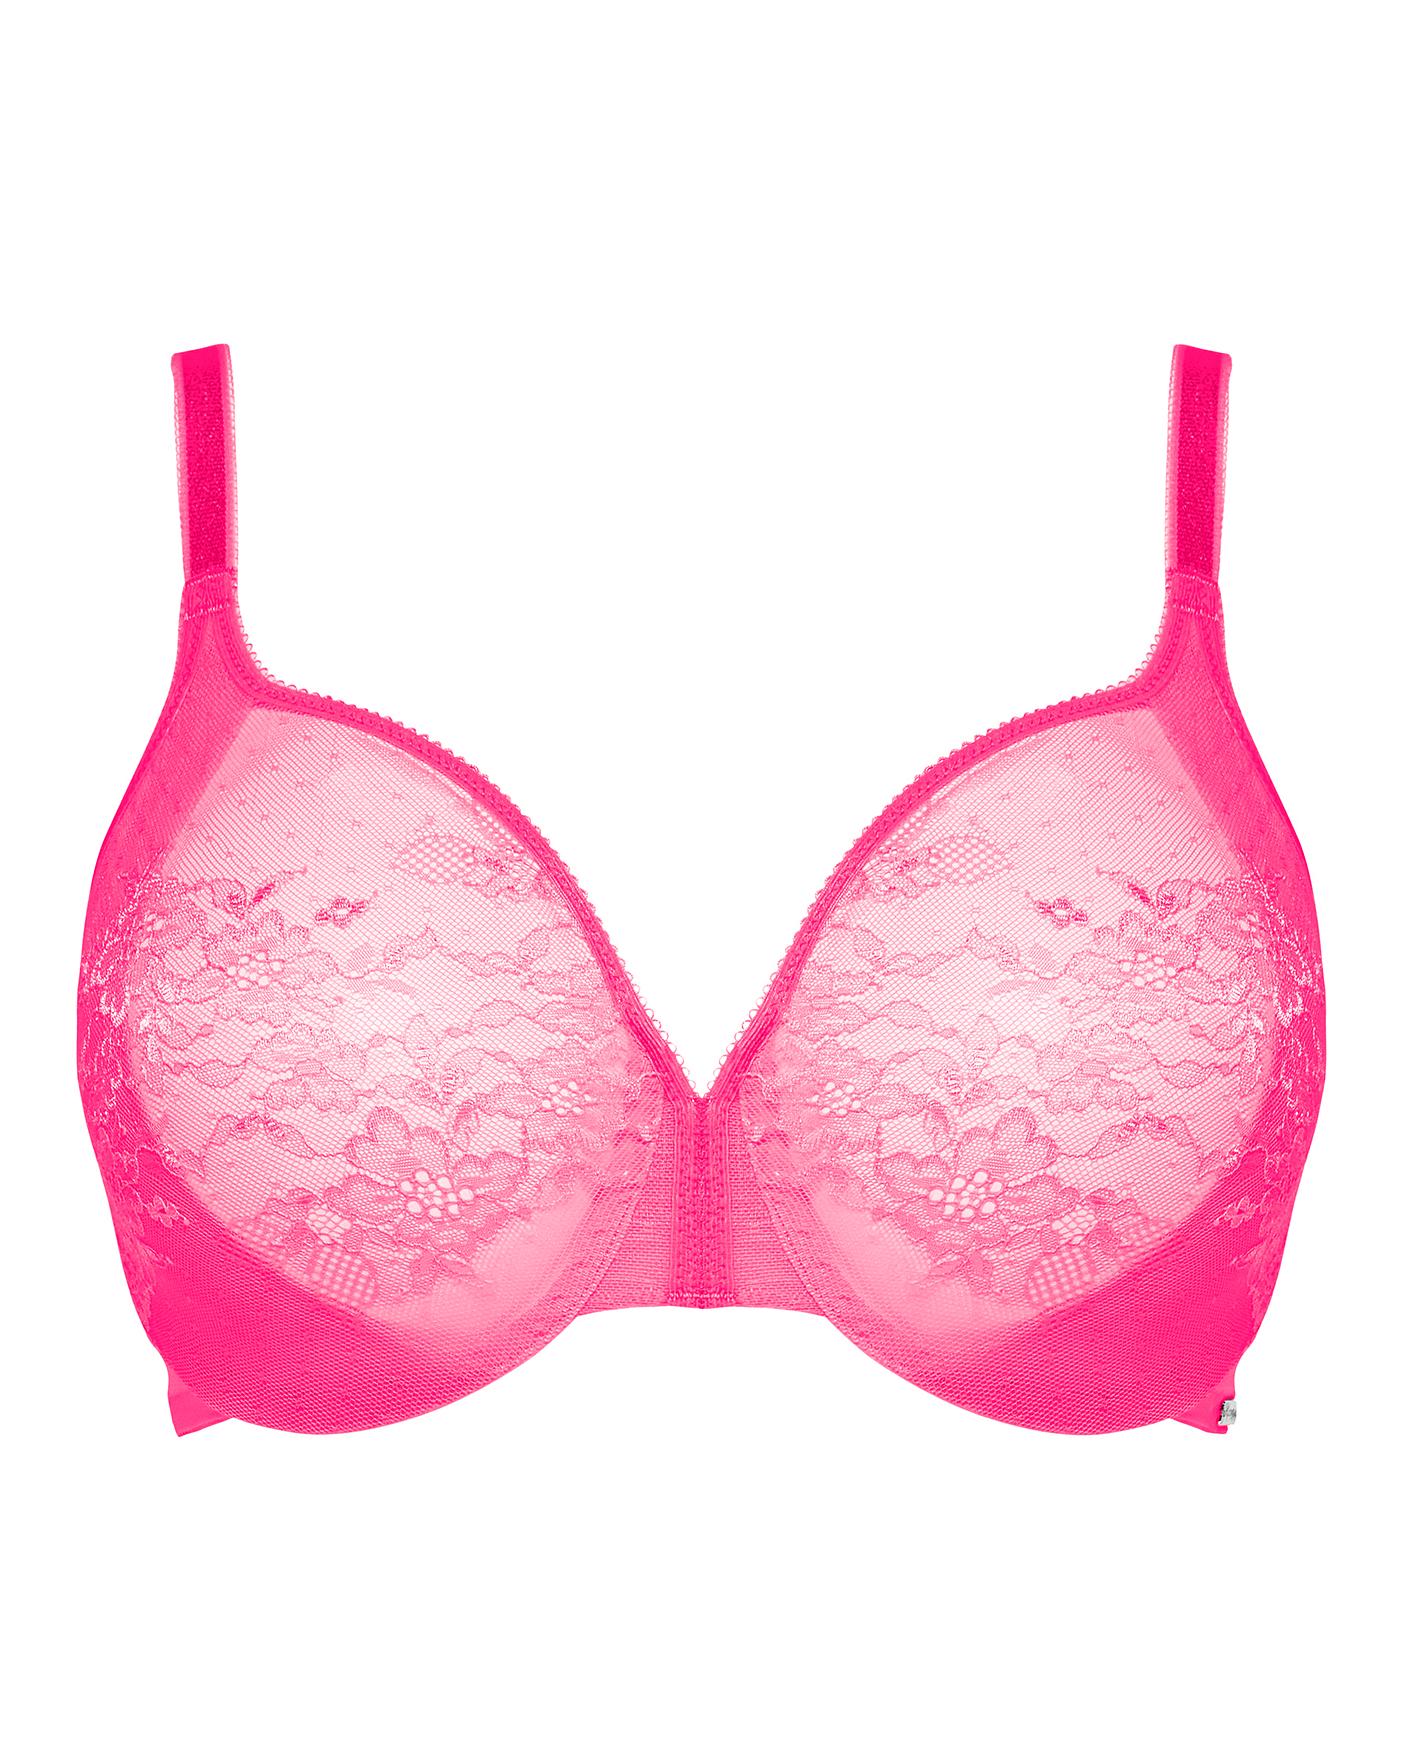 Gossard Glossies lace sheer lingerie set in hot pink